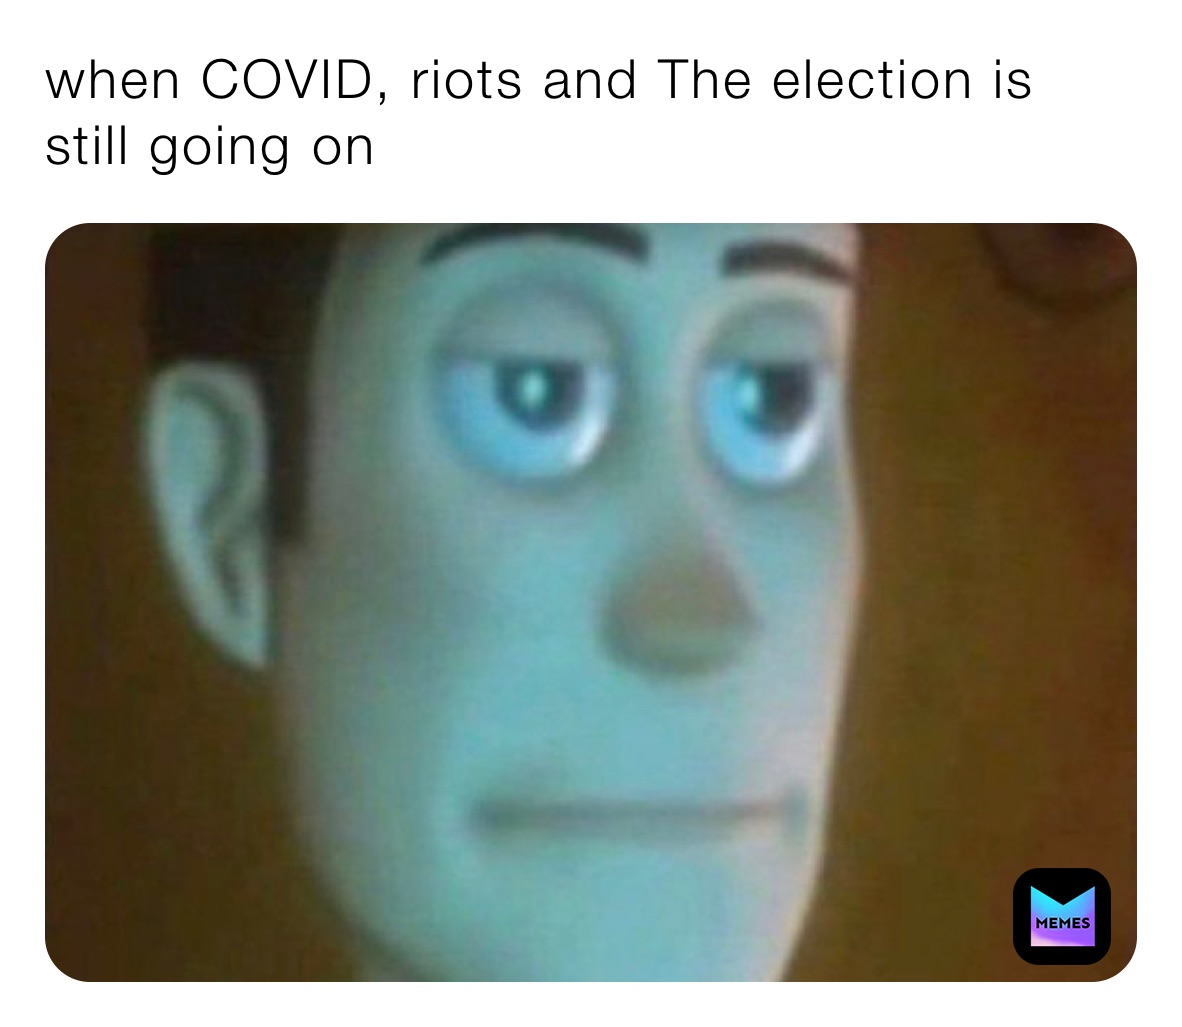 when COVID, riots and The election is still going on